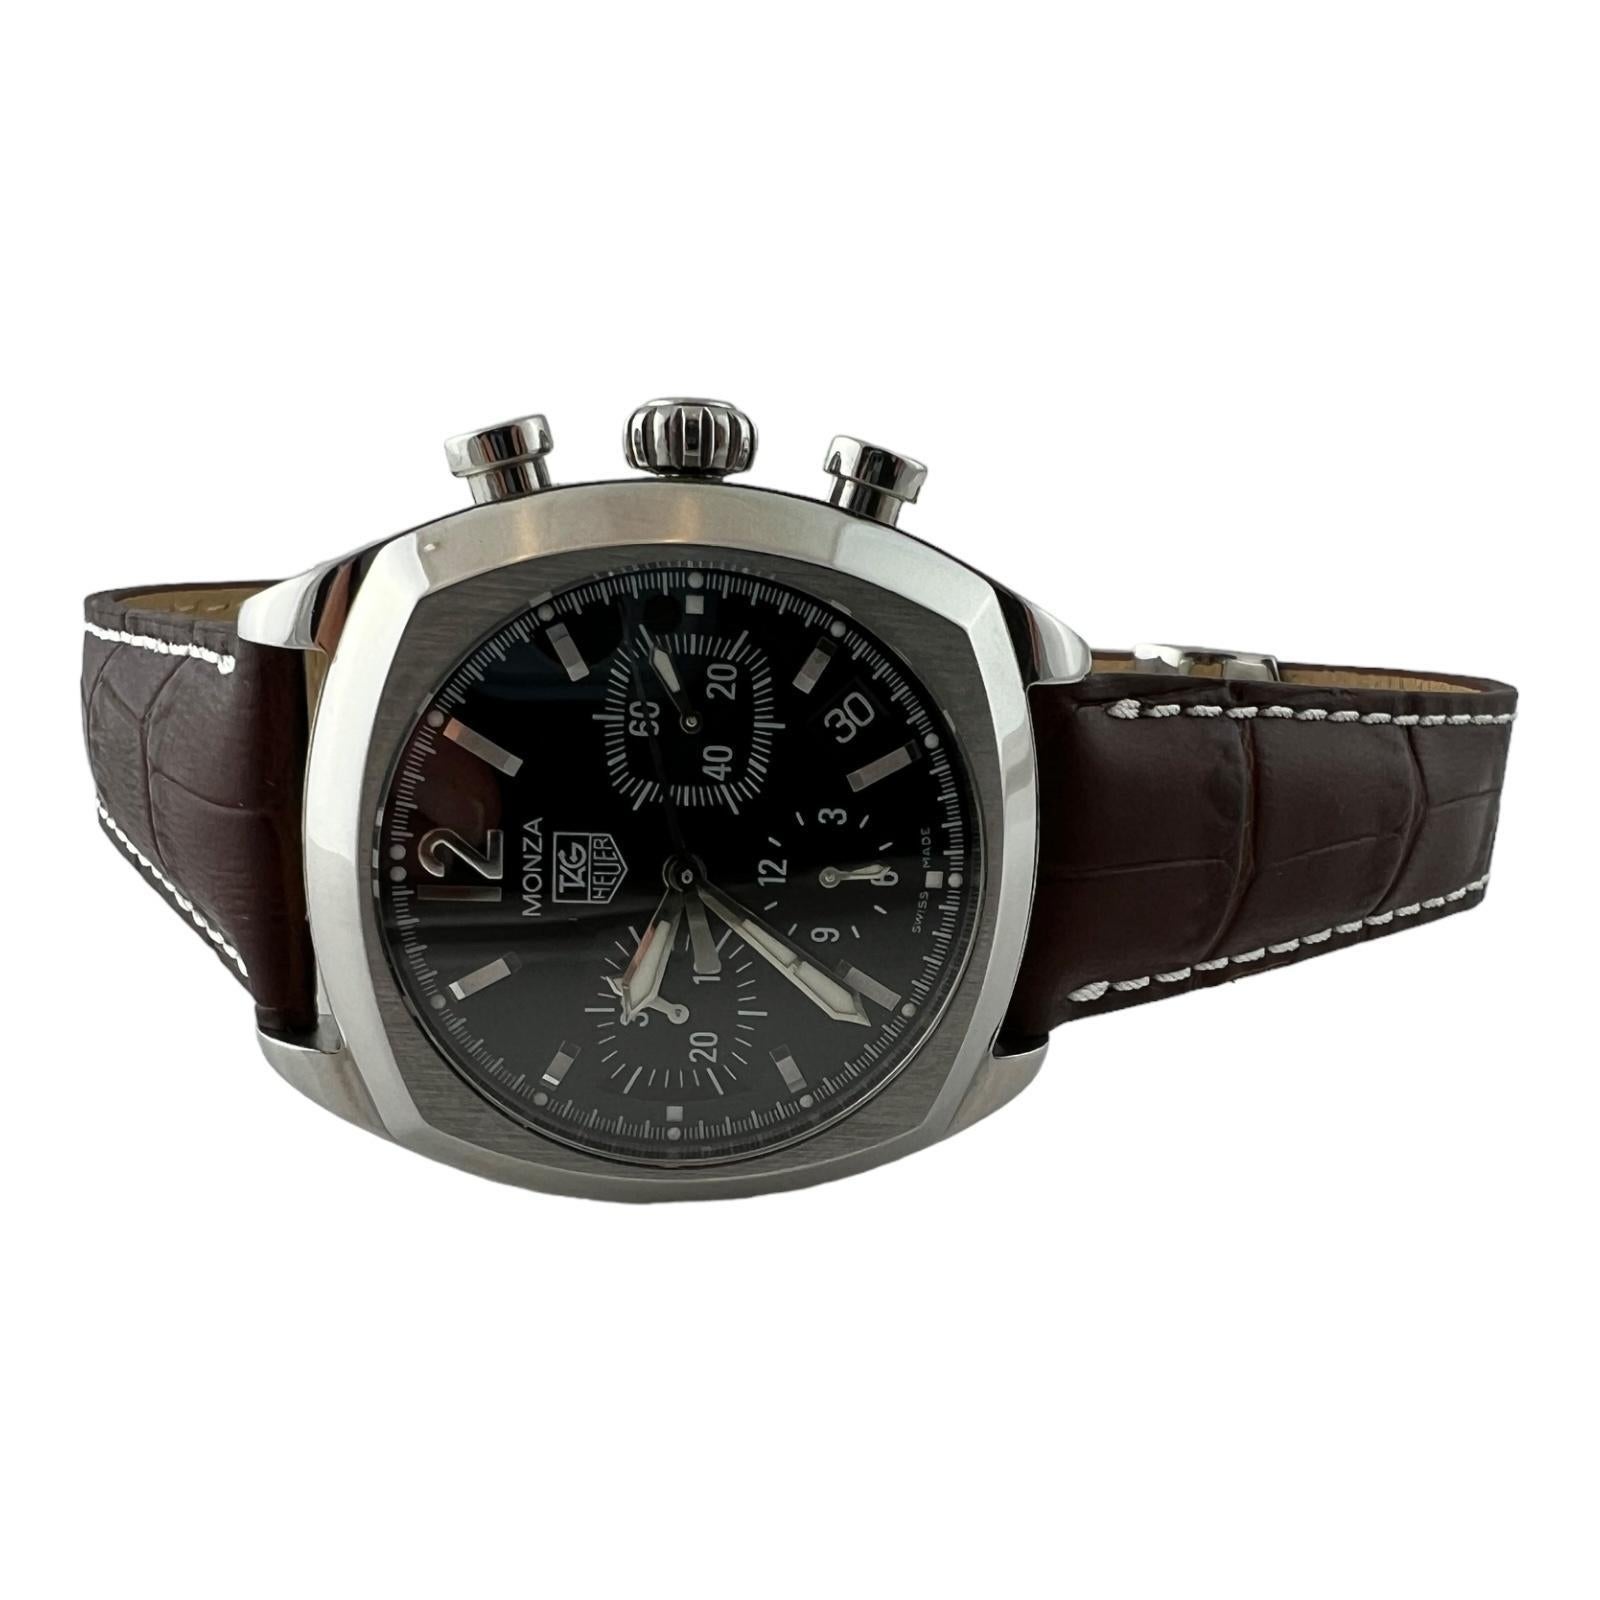 Tag Heuer Monza Men's Watch CR2113-0 Chronograph Steel Automatic #16469 4